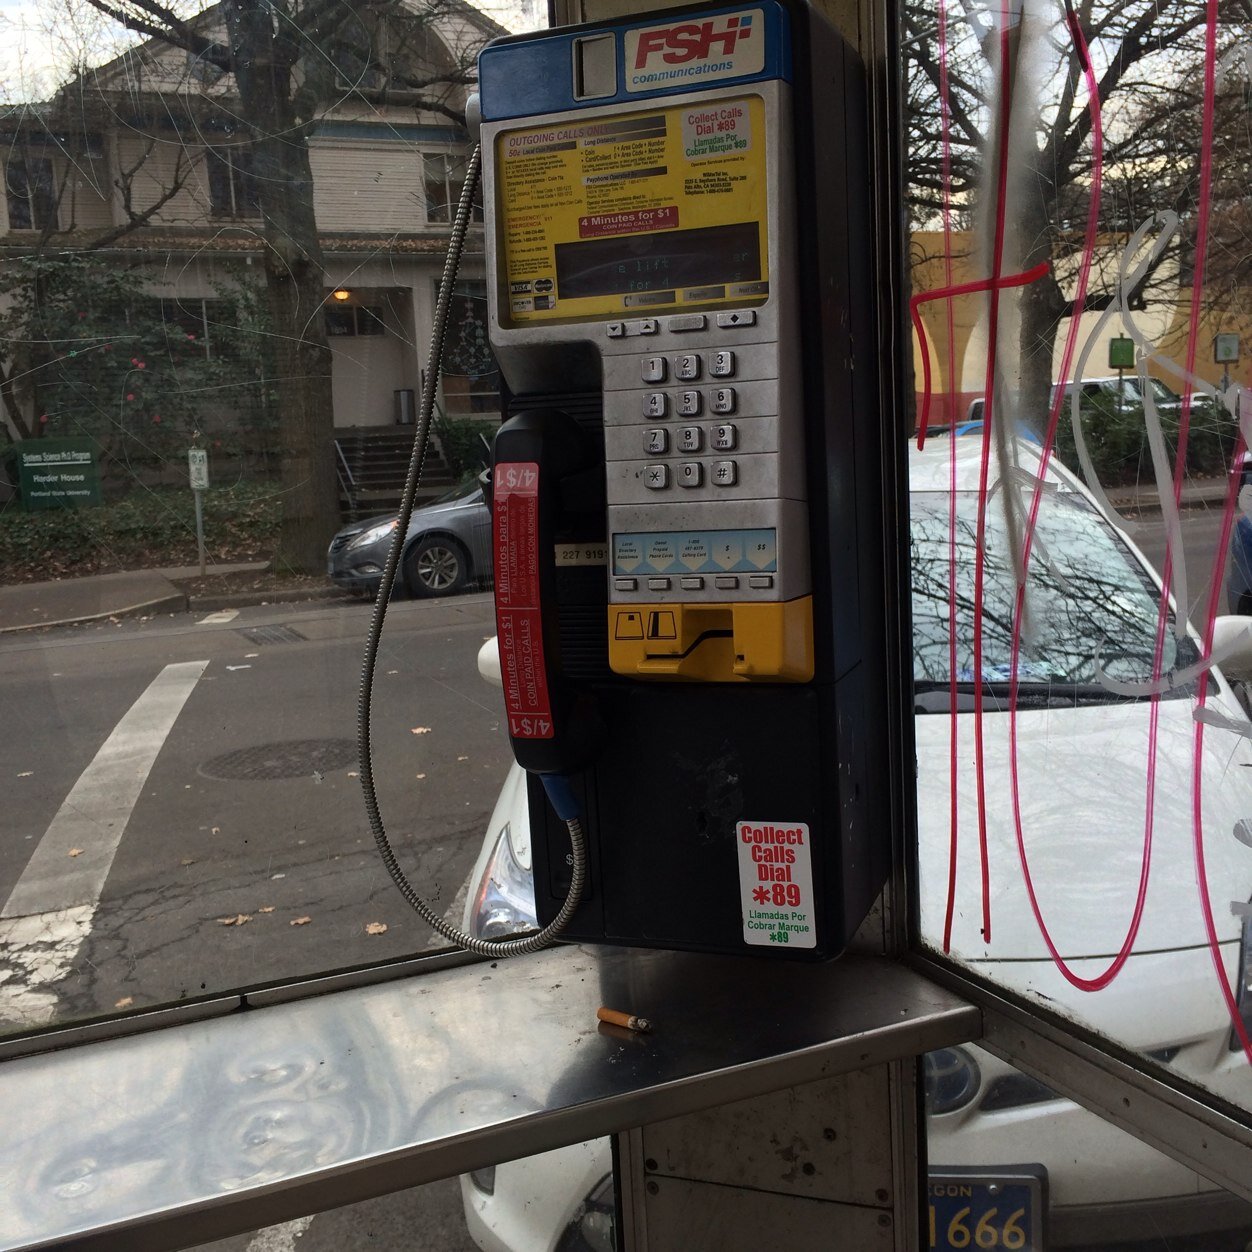 Ring Ring, it's the dream of the 90s. Alive, here in Portland. Just in case you lost you phone and happen to have change on you. $1 for 4 minutes.